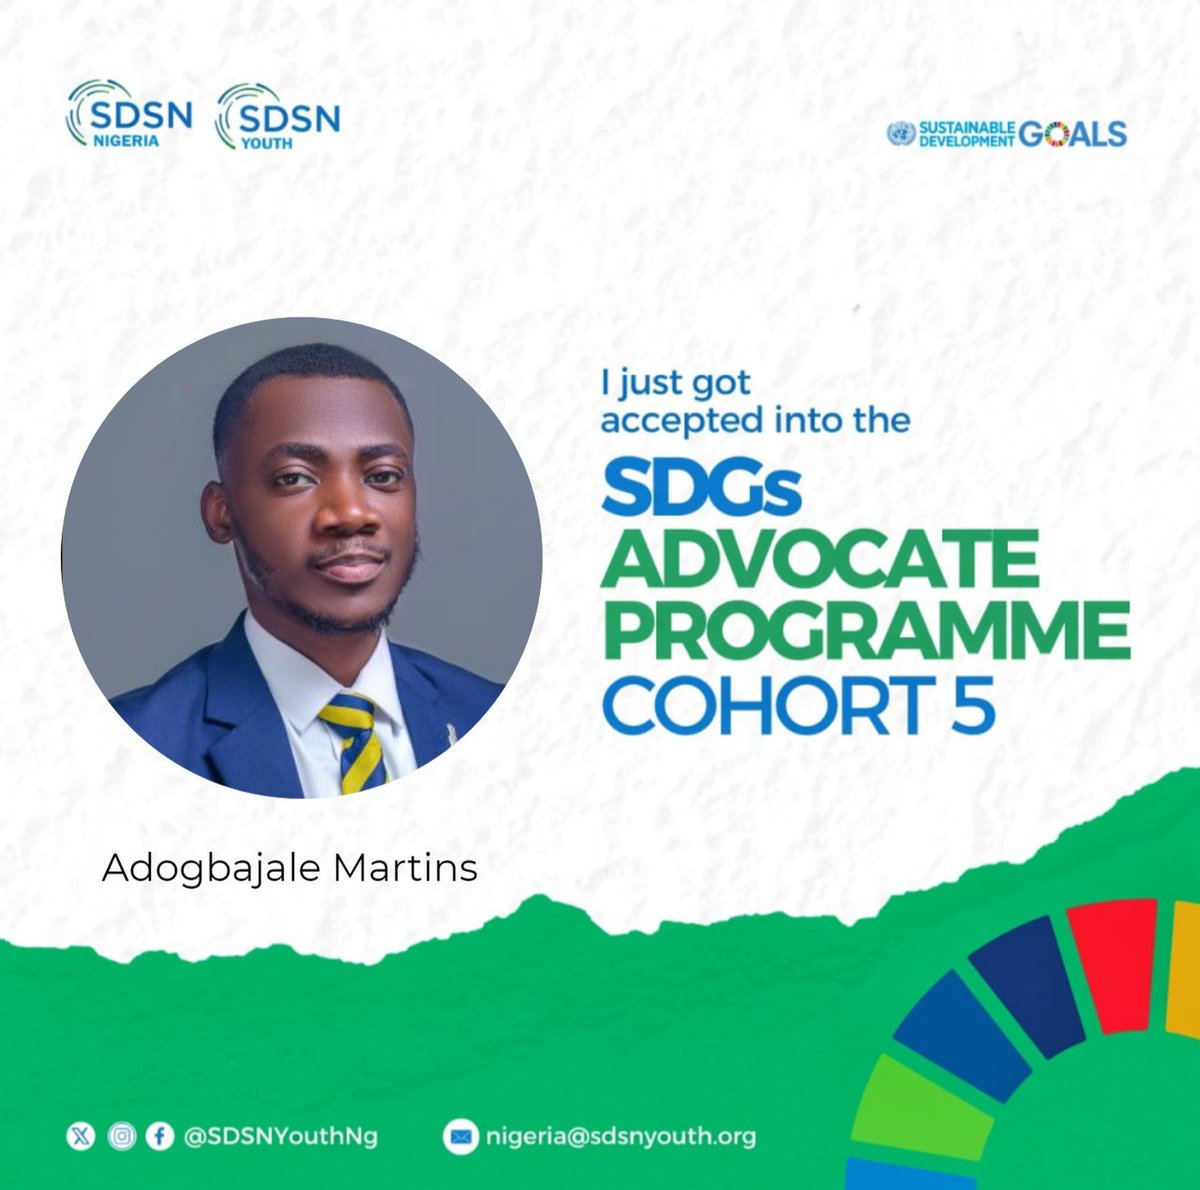 I am thrilled to announce that I have been selected for the 5th cohort of the SDGs Advocate Programme! Ready to be equipped with knowledge and necessary skills for effectively responding to the challenges of this century.

Thank you @SDSNYouthNG for this opportunity
#SDGsAdvocate